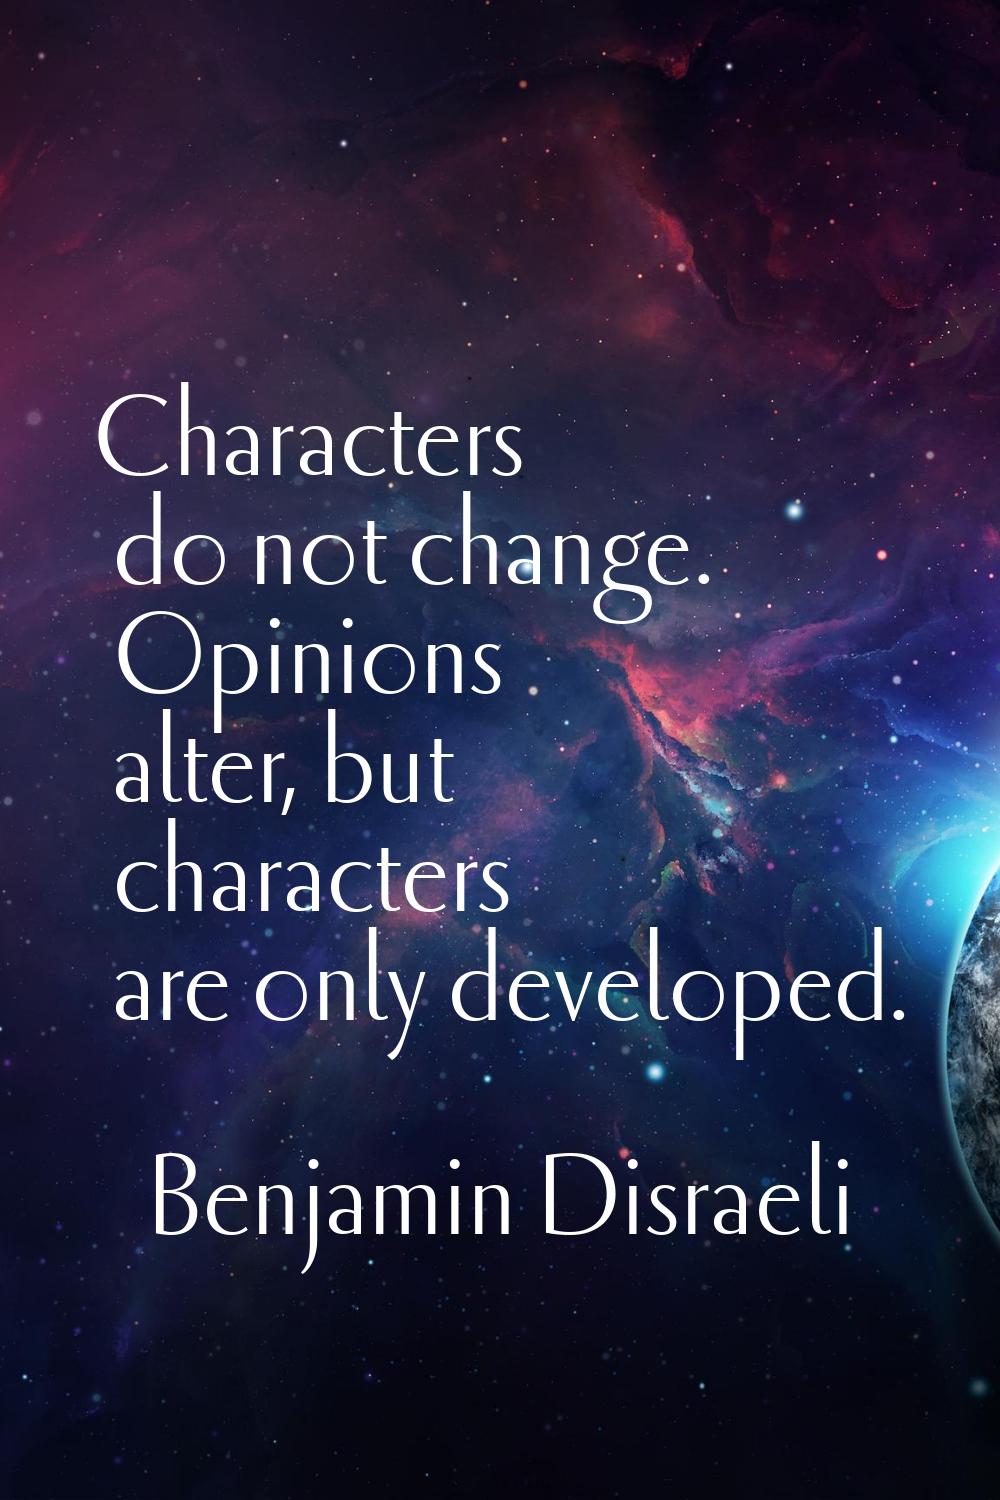 Characters do not change. Opinions alter, but characters are only developed.